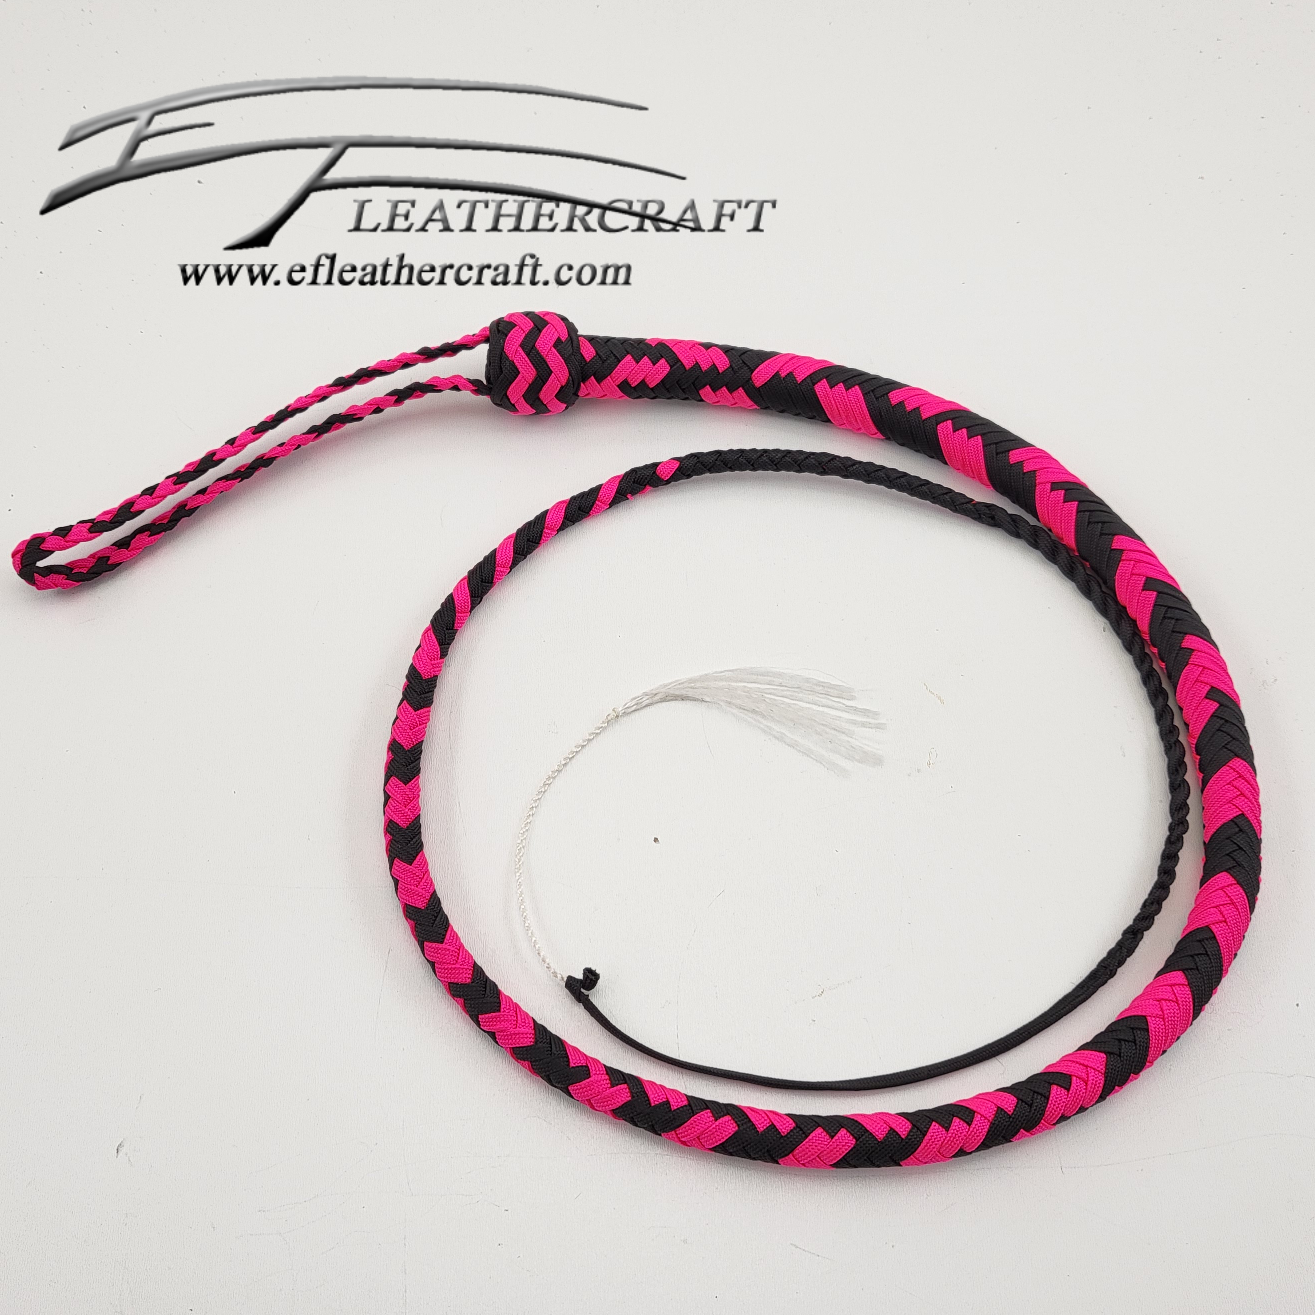 Nylon Signal Whip - 4ft - Black and Neon Pink